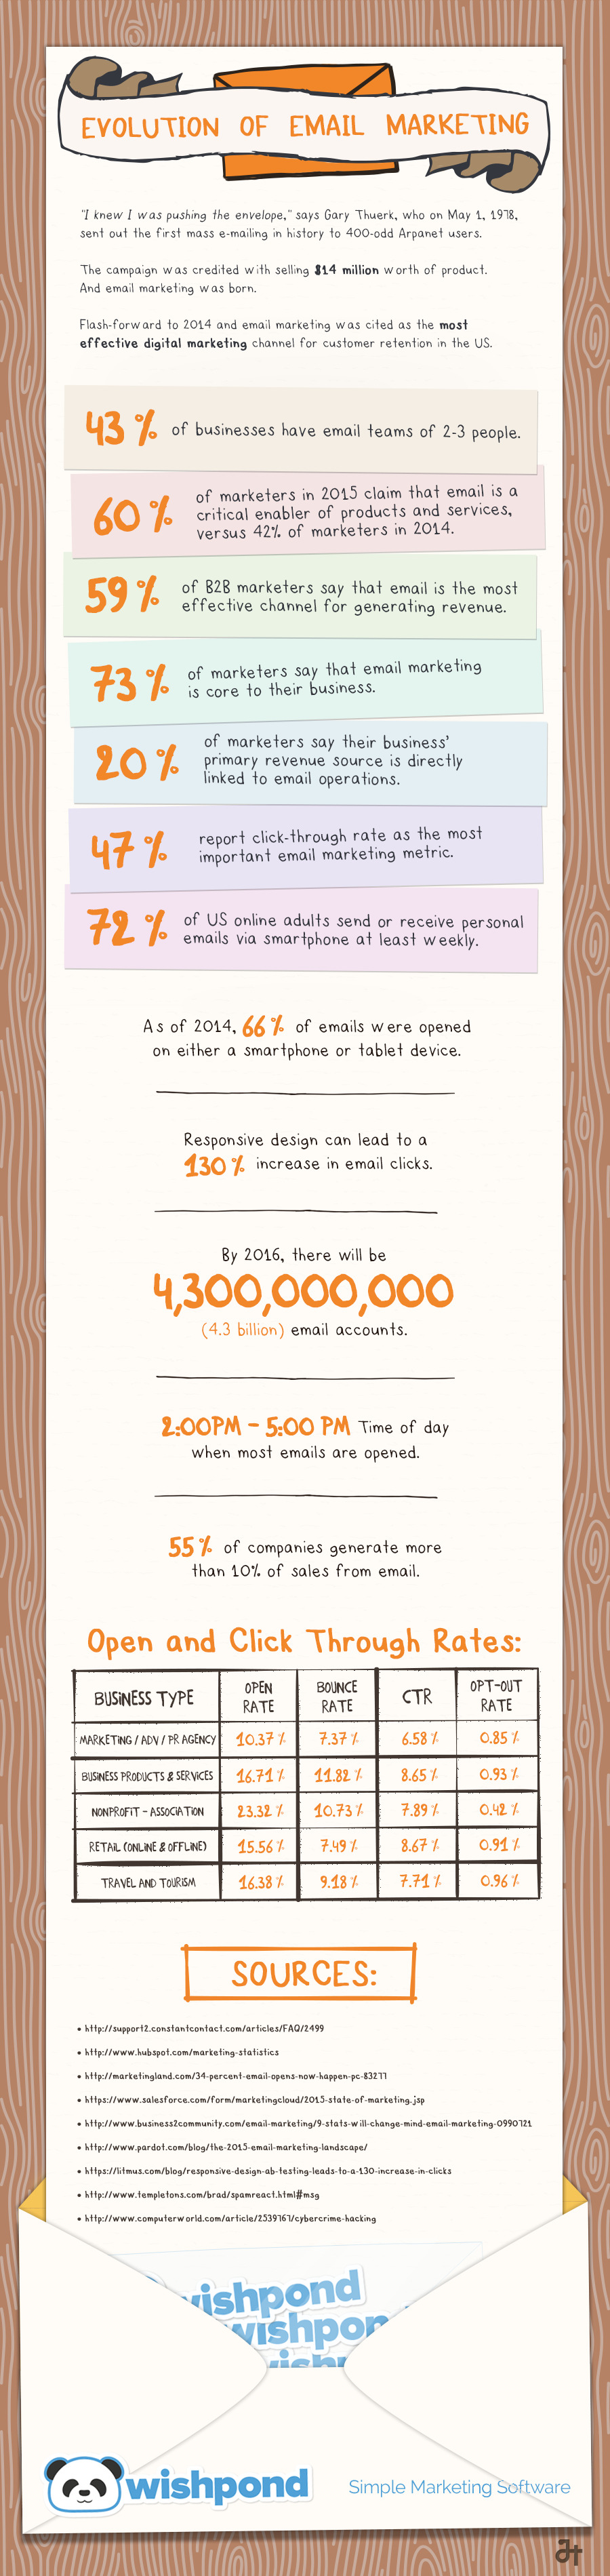 Evolution of Email Marketing Infographic